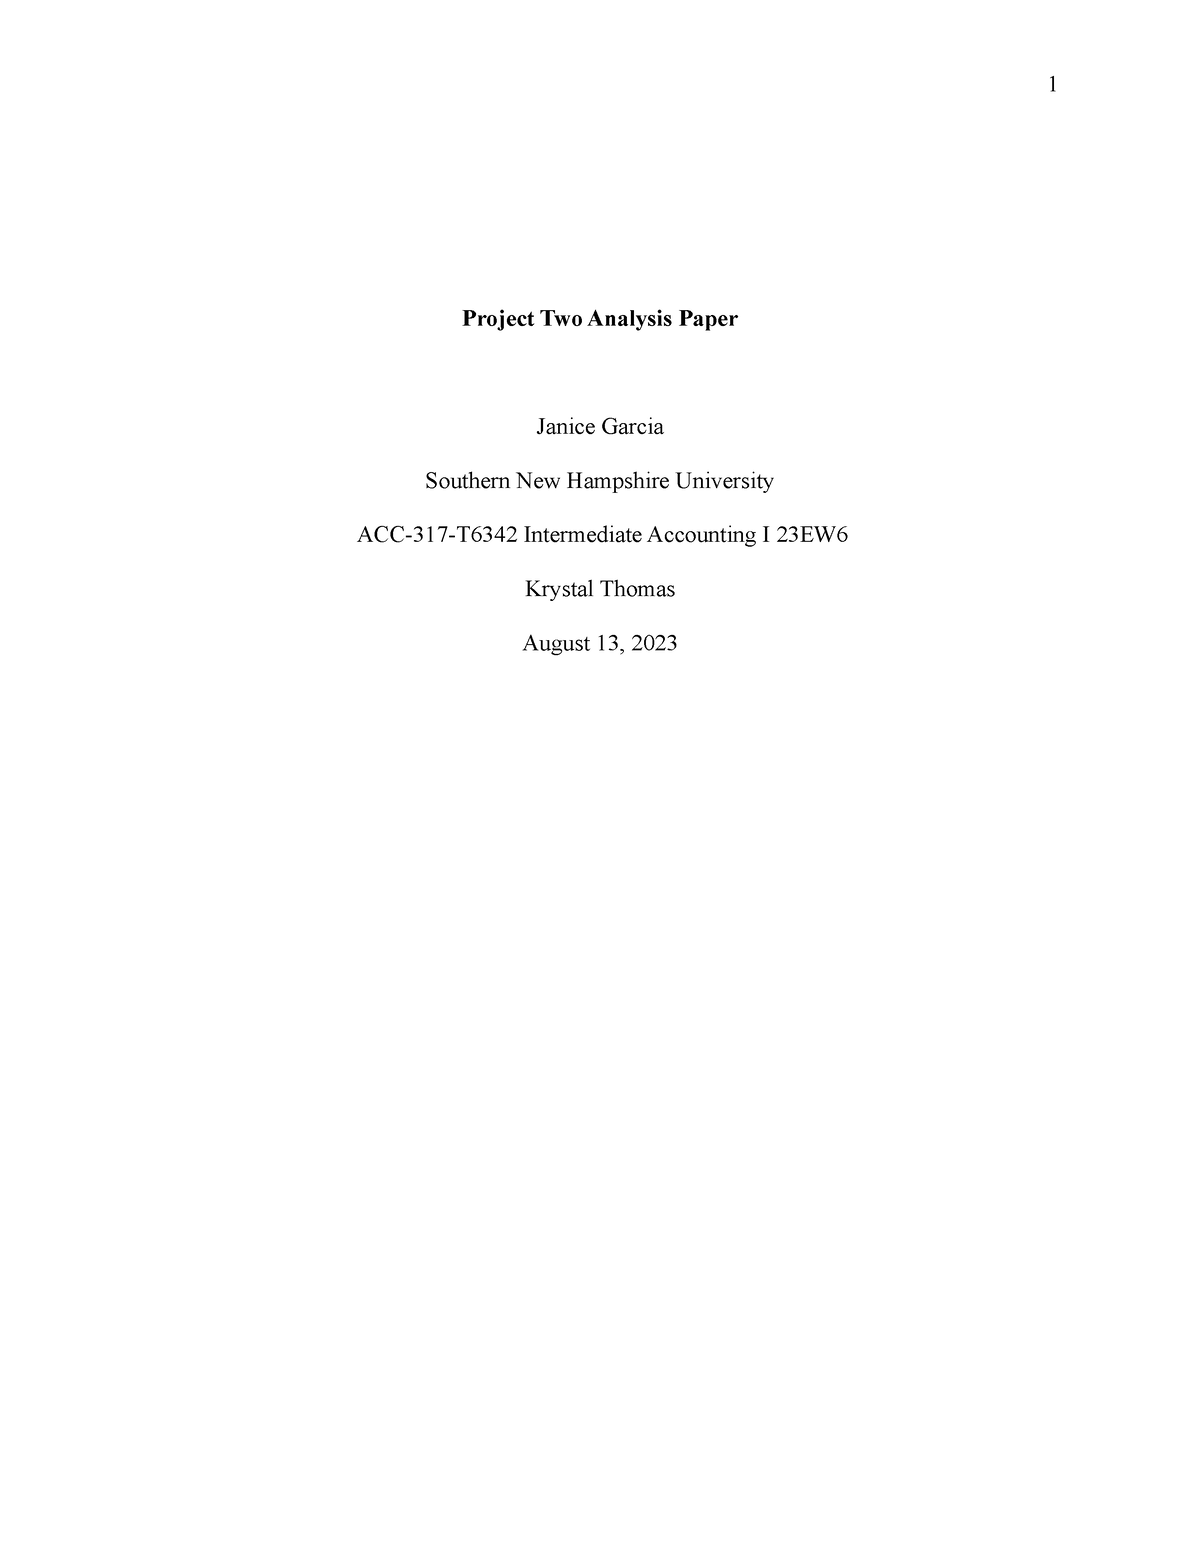 ACC 317 Project Two Analysis Paper - Project Two Analysis Paper Janice ...